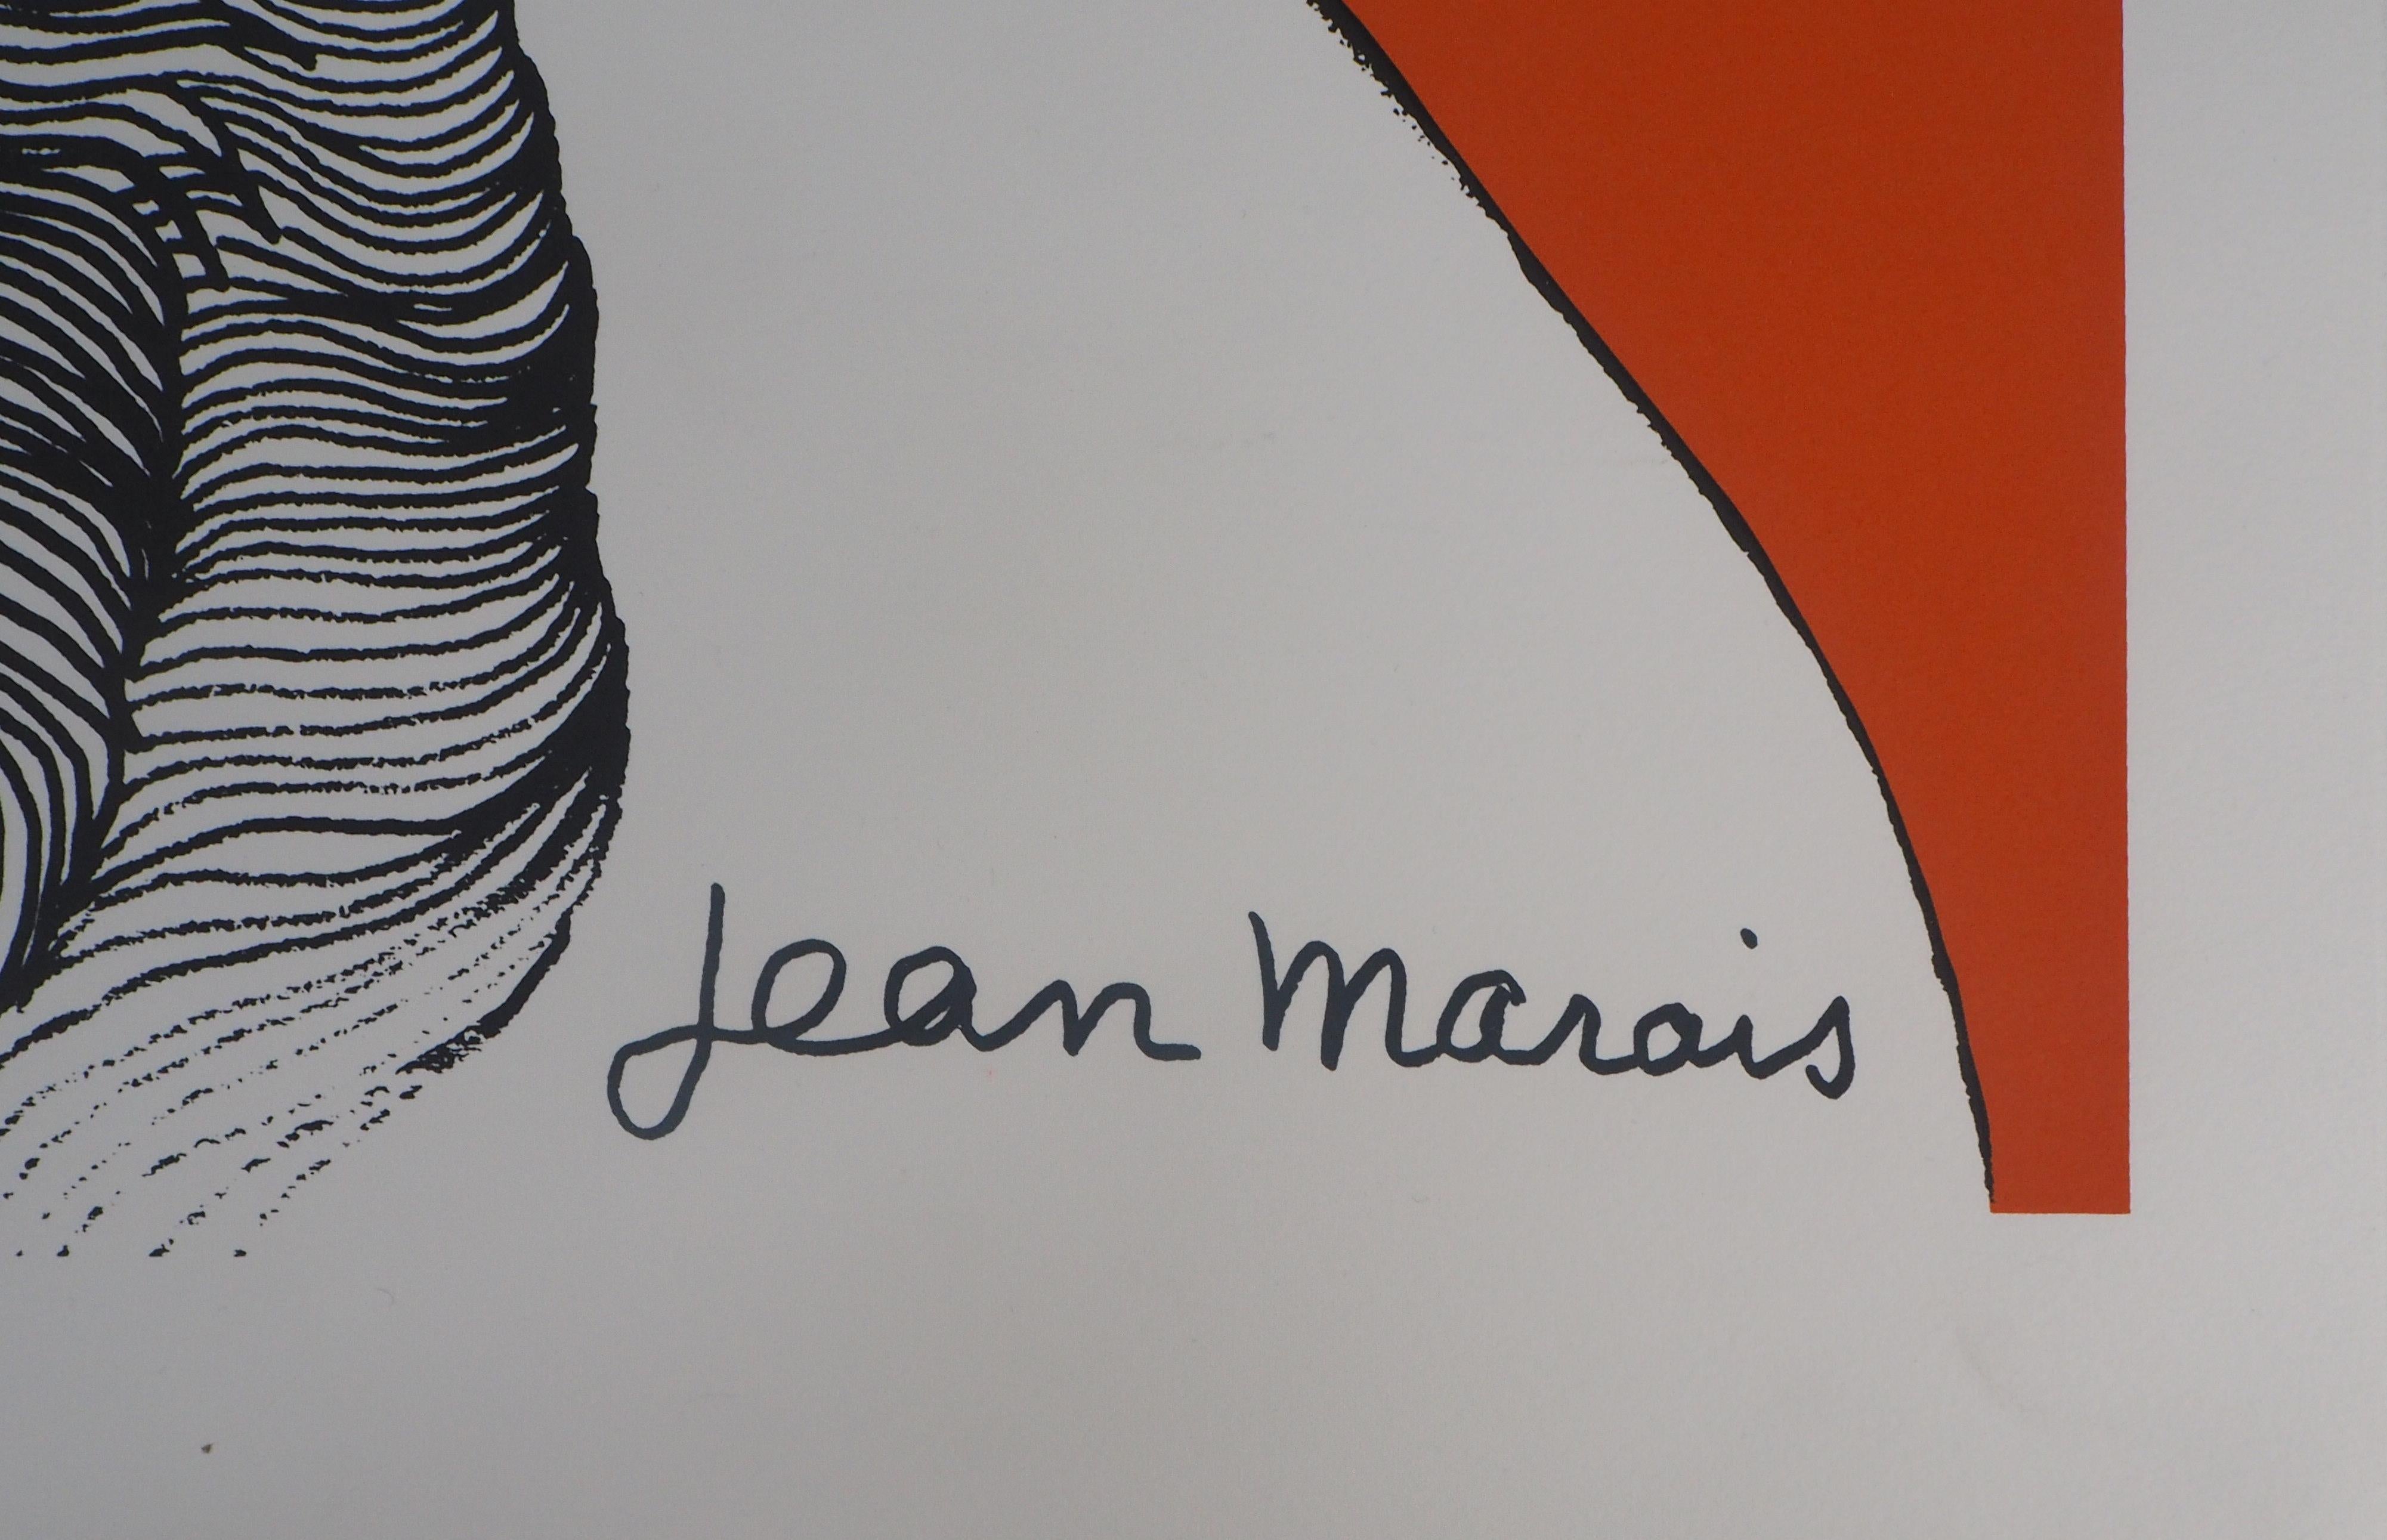 Jean Marais (1913 - 1998)
Horses 

Original lithograph
Signed with the stamp of the artist
(Also bears printed signature in the plate)
Numbered / 50 copies
On vellum 82 x 80 cm (c. 34 x 32inch)

Excellent condition

Jean Marais is a famous french